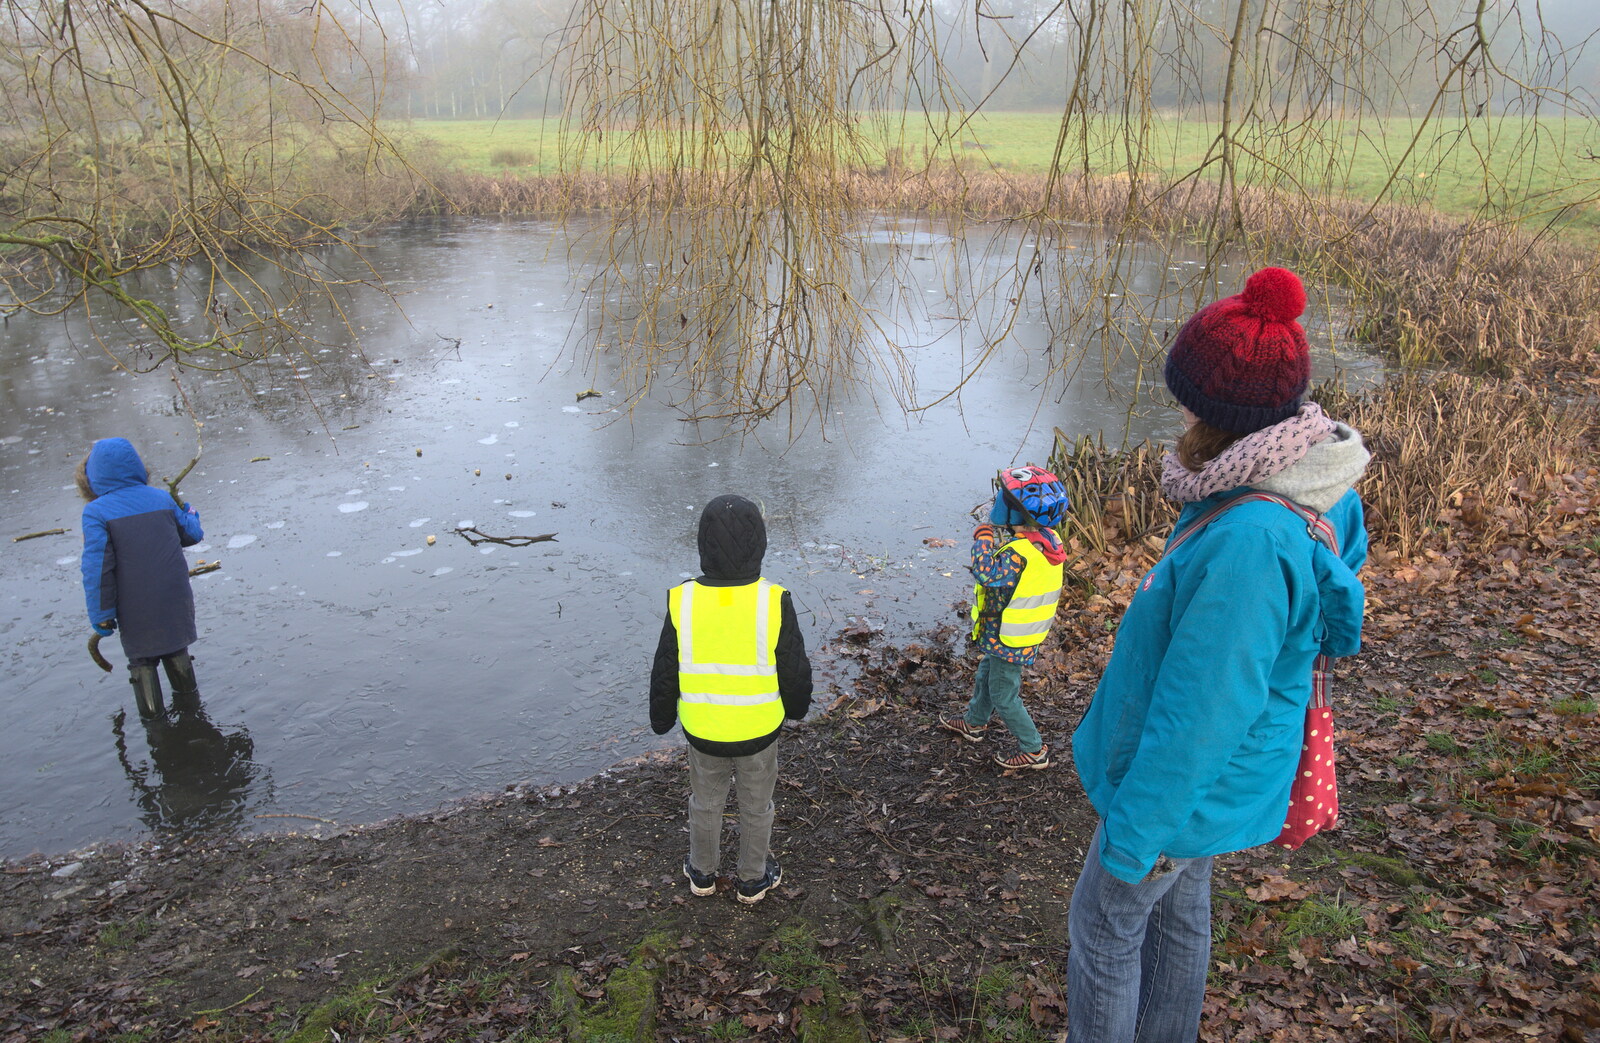 We inspect a frozen pond from A Trip to Ickworth House, Horringer, Suffolk - 30th December 2016